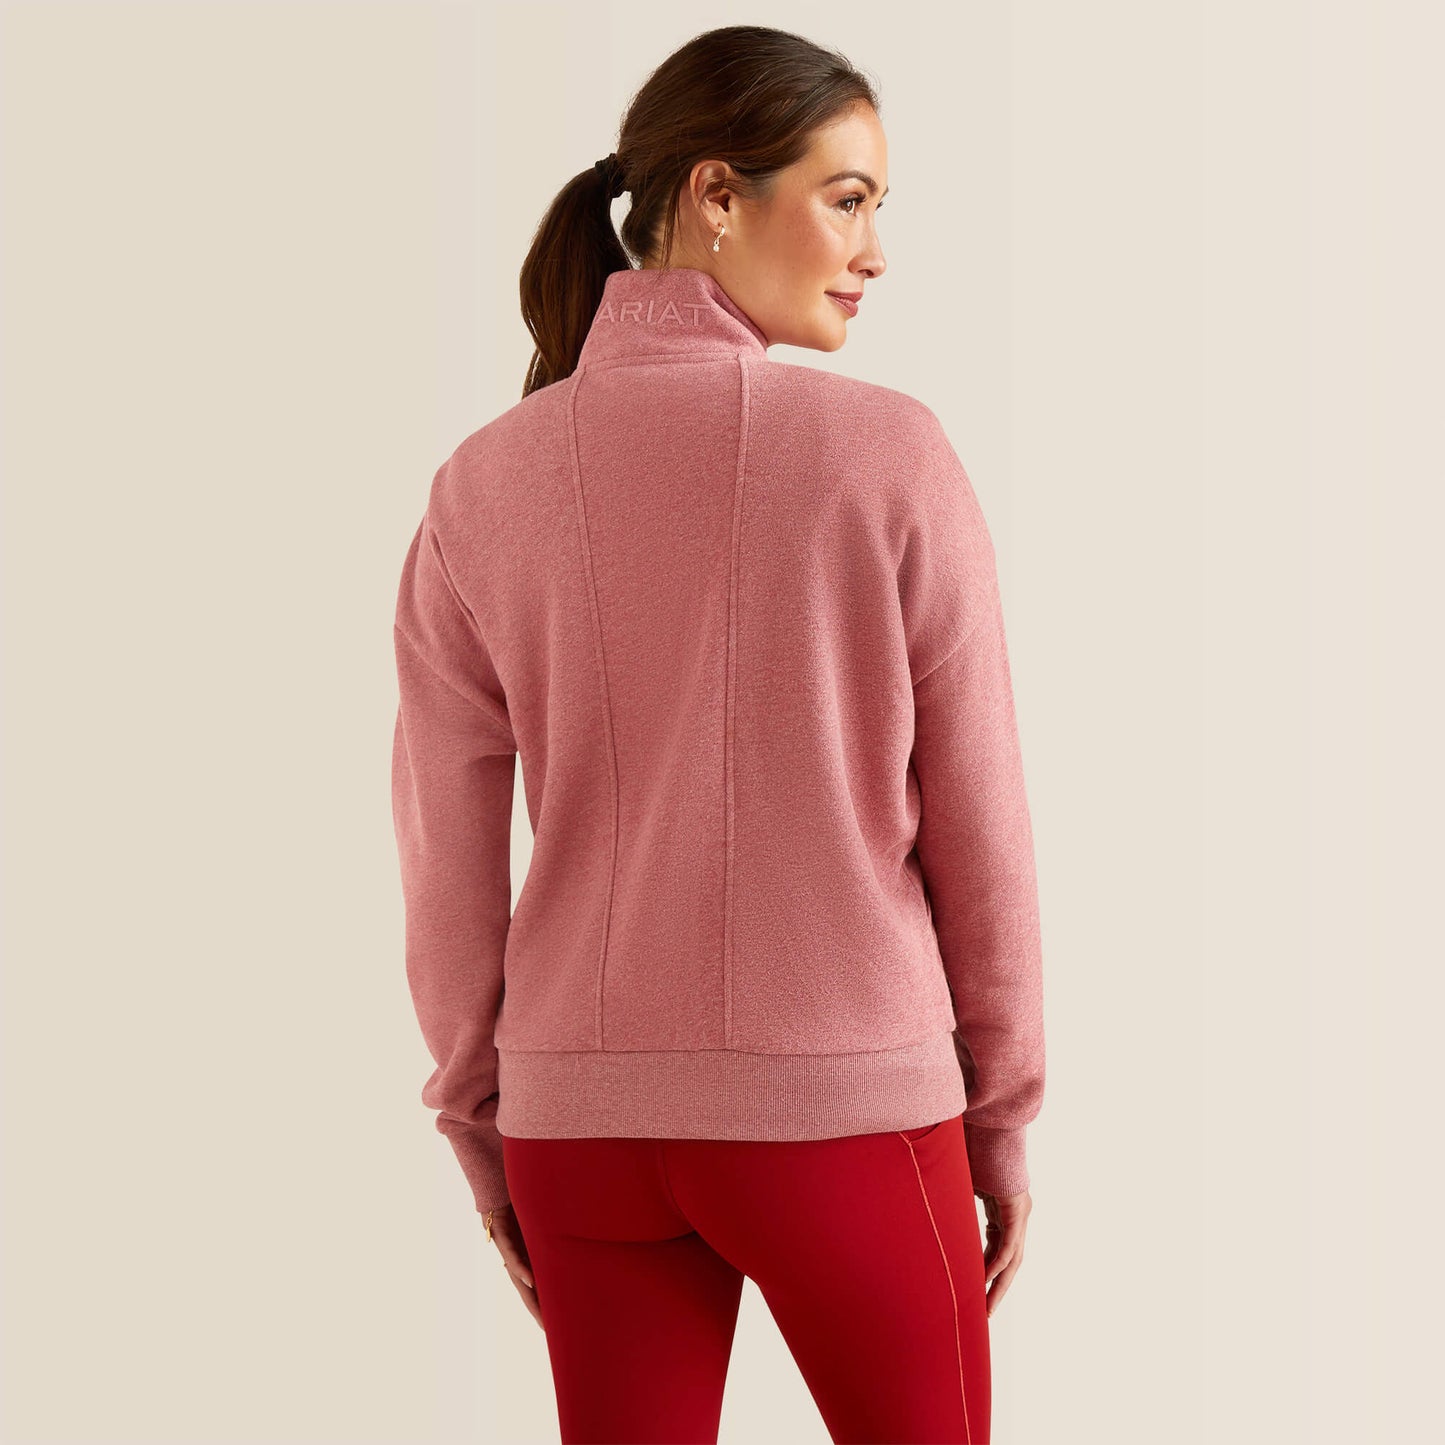 THE COTTON CANDY 1/2 ZIP {ARIAT}